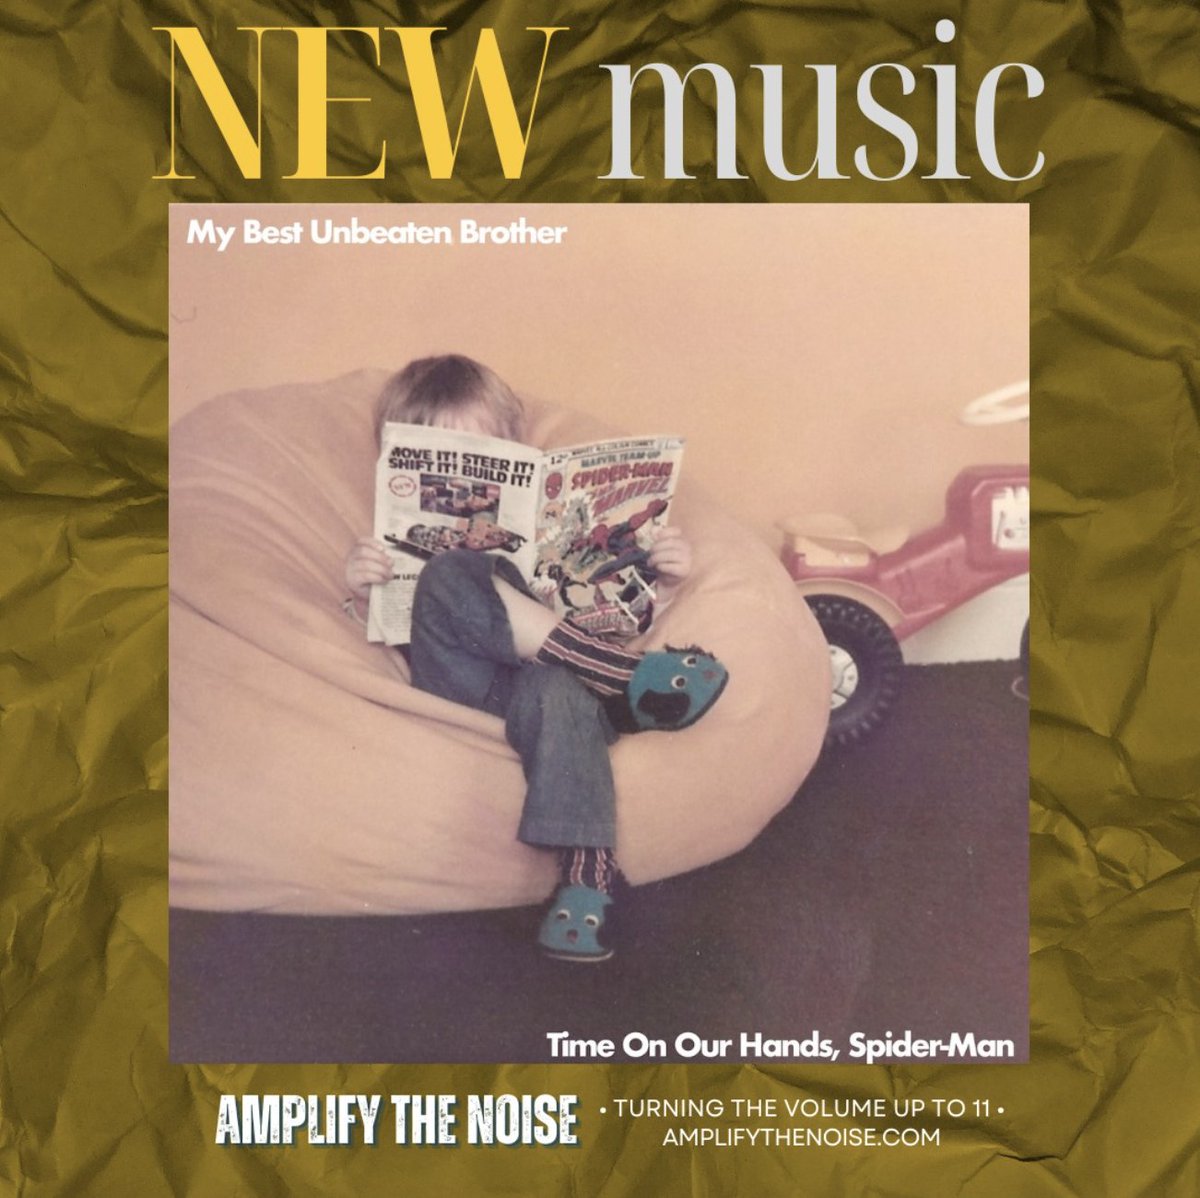 'Time on Our Hands, Spider-Man offers a compelling narrative that speaks to the complexities of life and the enduring search for meaning and purpose.' @BestUnbeatenBro featured by Australia's Amplify the Noise: amplifythenoise.com/listen-time-on…